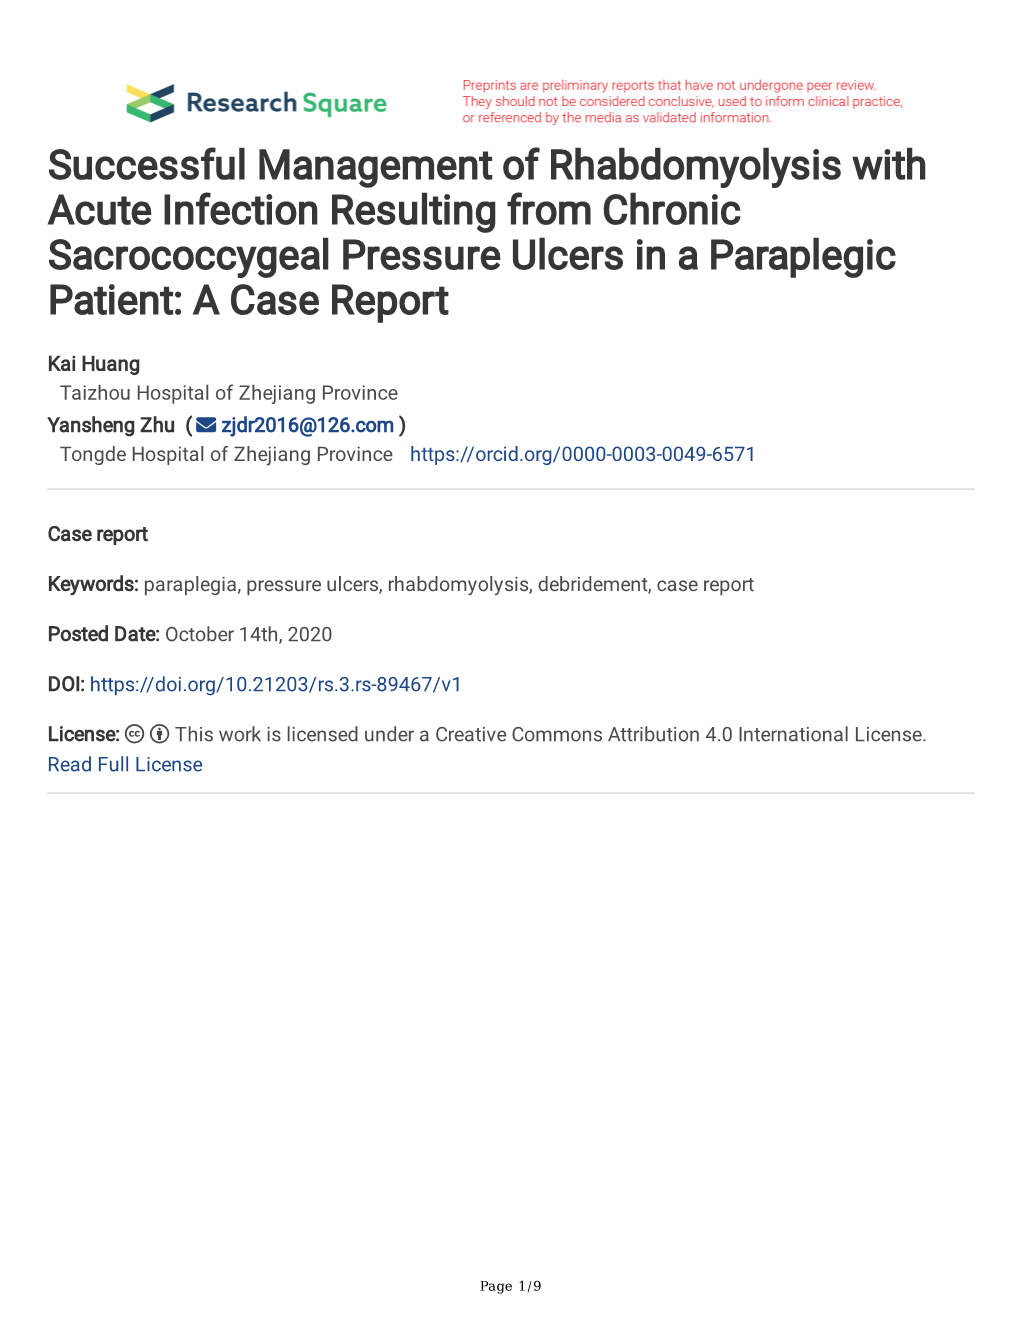 Successful Management of Rhabdomyolysis with Acute Infection Resulting from Chronic Sacrococcygeal Pressure Ulcers in a Paraplegic Patient: a Case Report